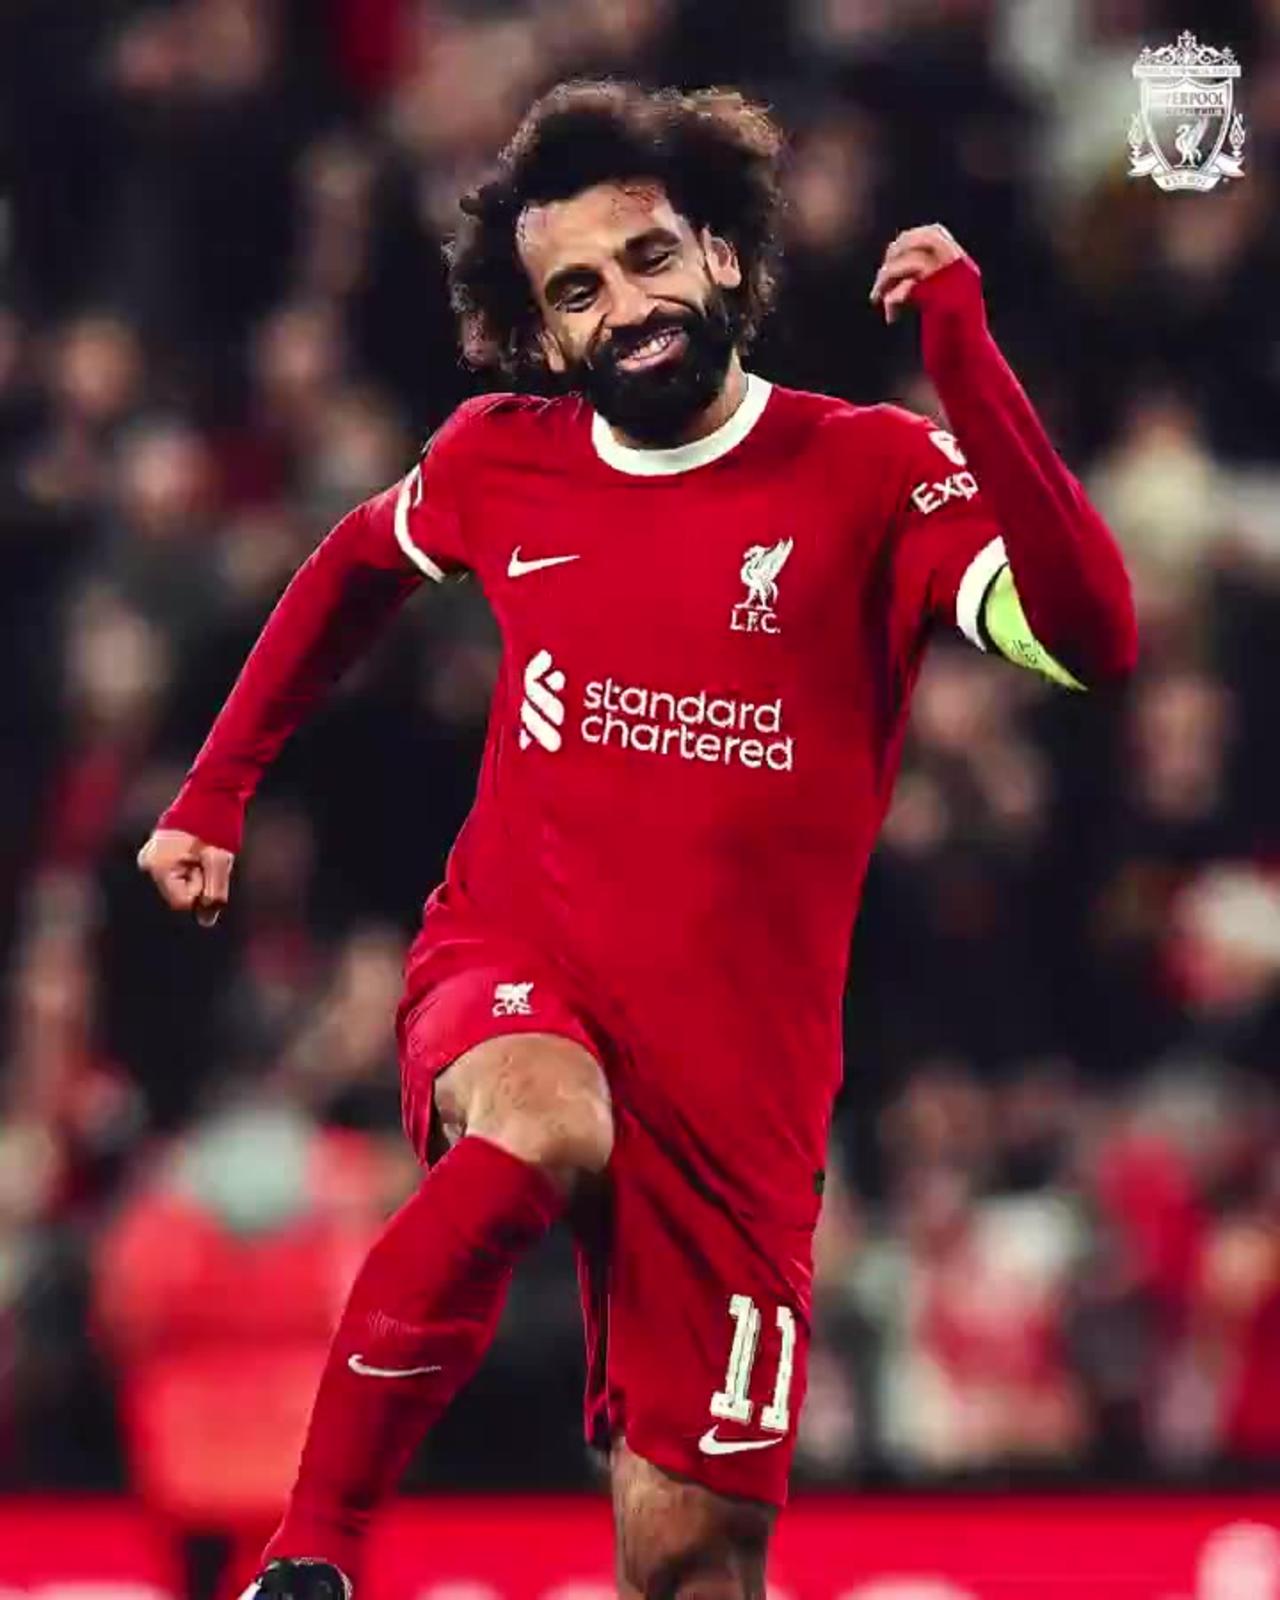 After reaching 200 goals with Liverpool، Mohamed Salah